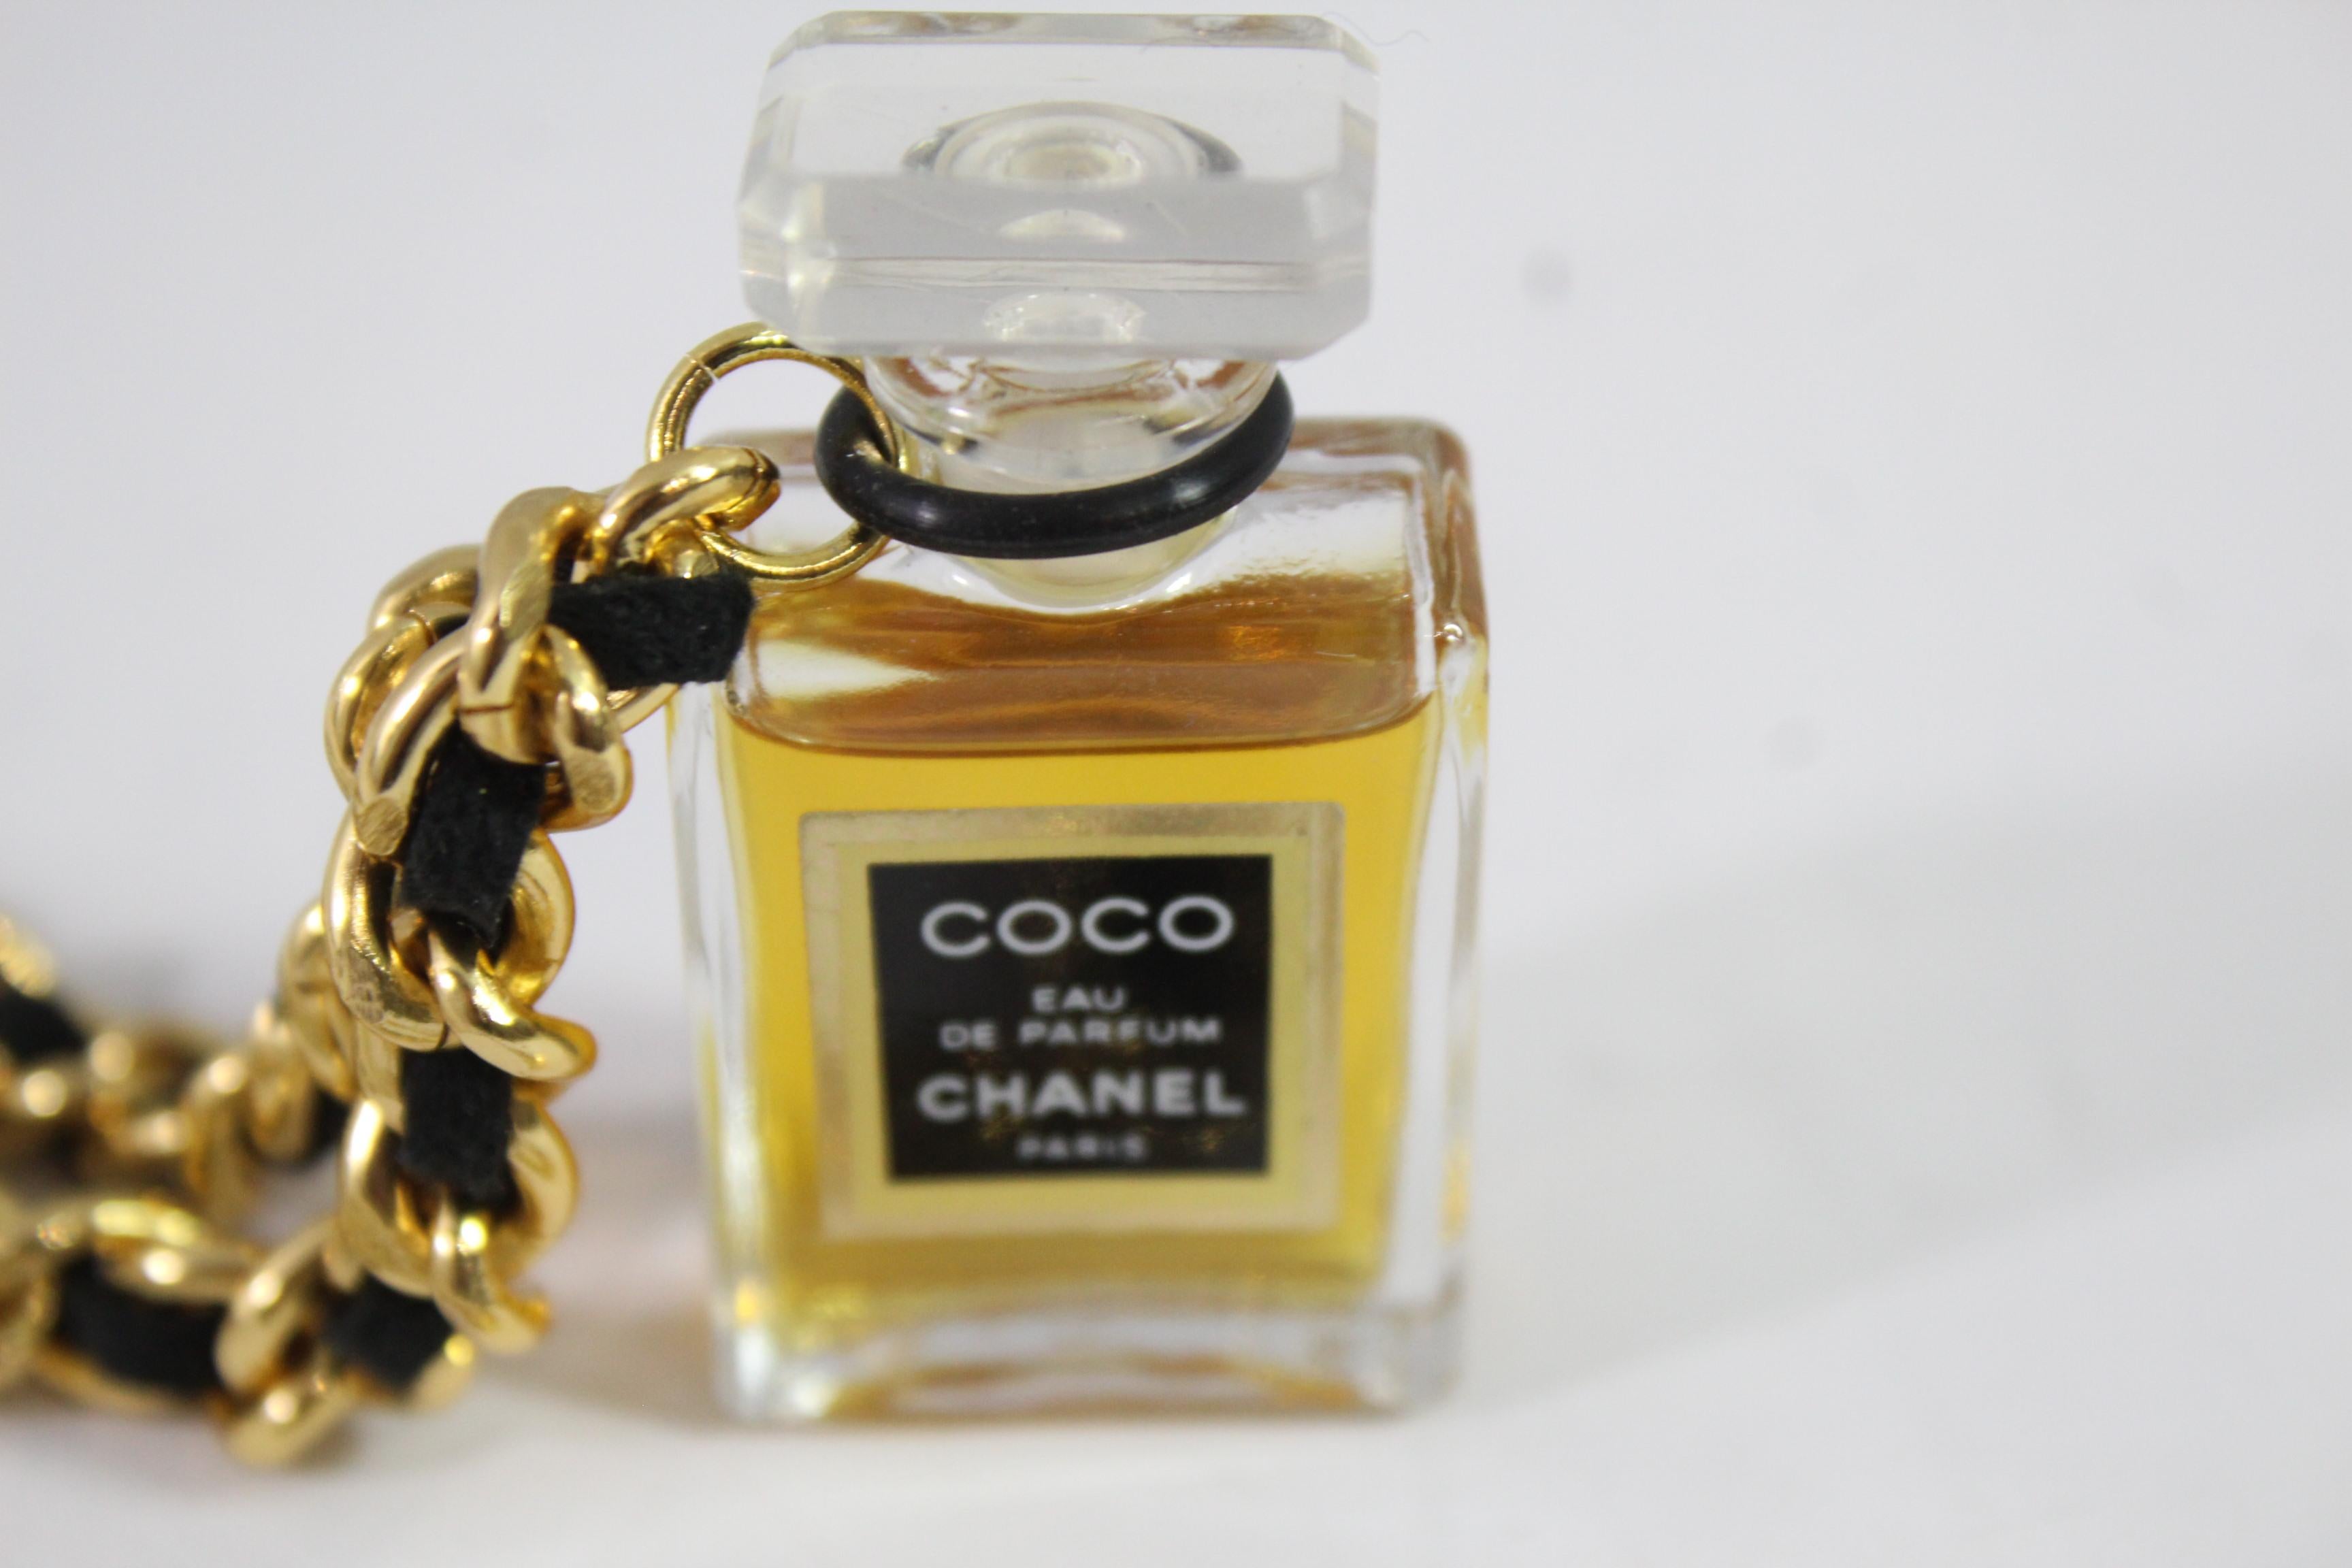 Chanel Vintage Parfum Bottle Necklace with golden chain. There is real parfum inside.

This was given as a gift to customers, so not available in the shop

Really good vintage condition

